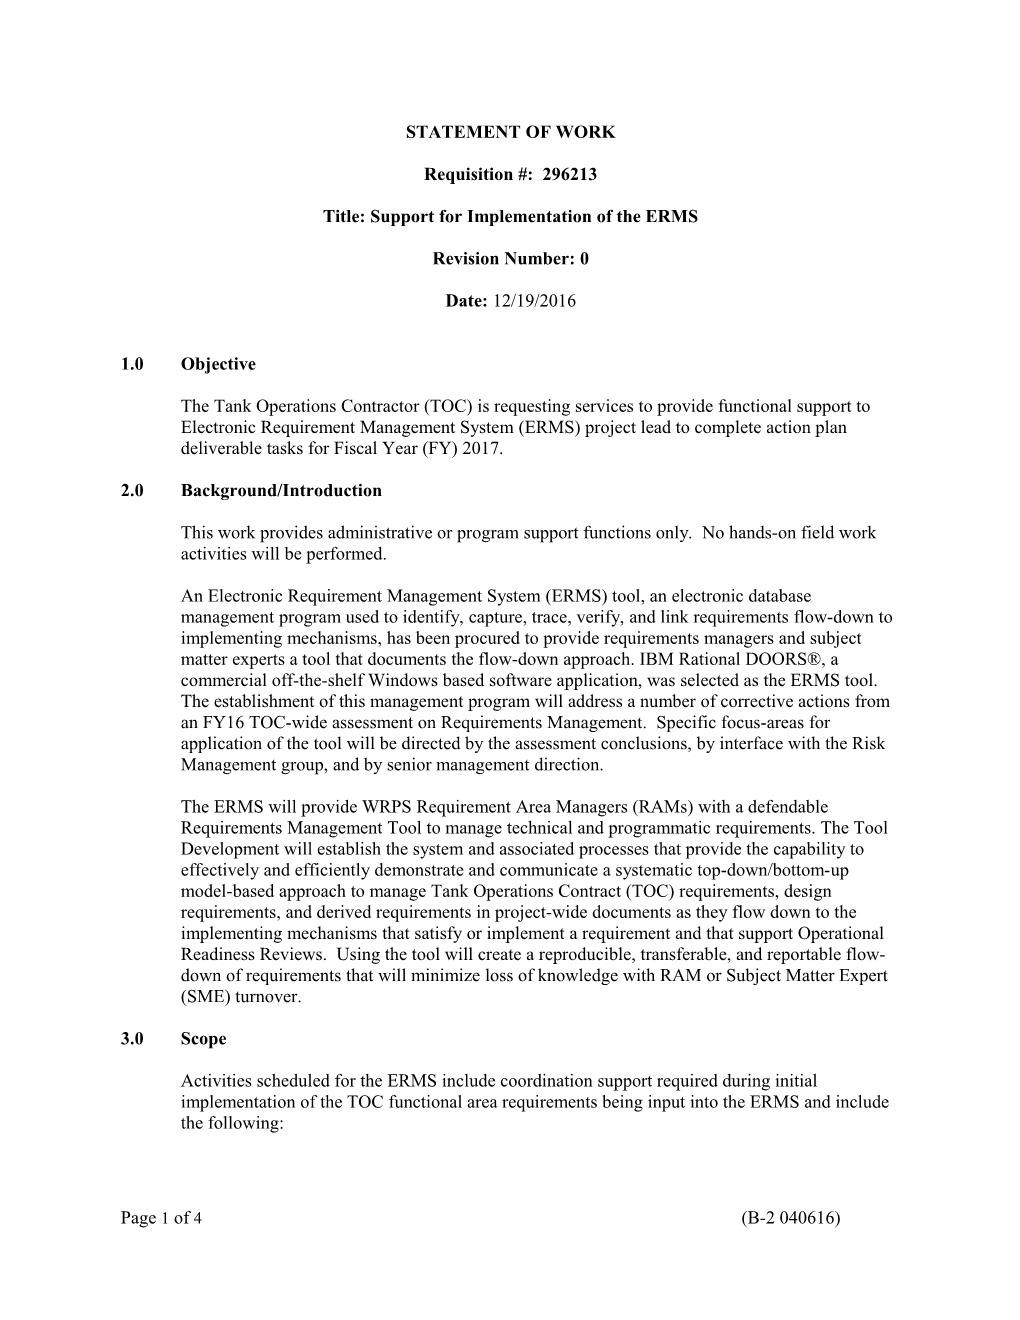 HNF-IP-0842 Volume 10 Section 3.24 Statement of Work for a Contract Requisition